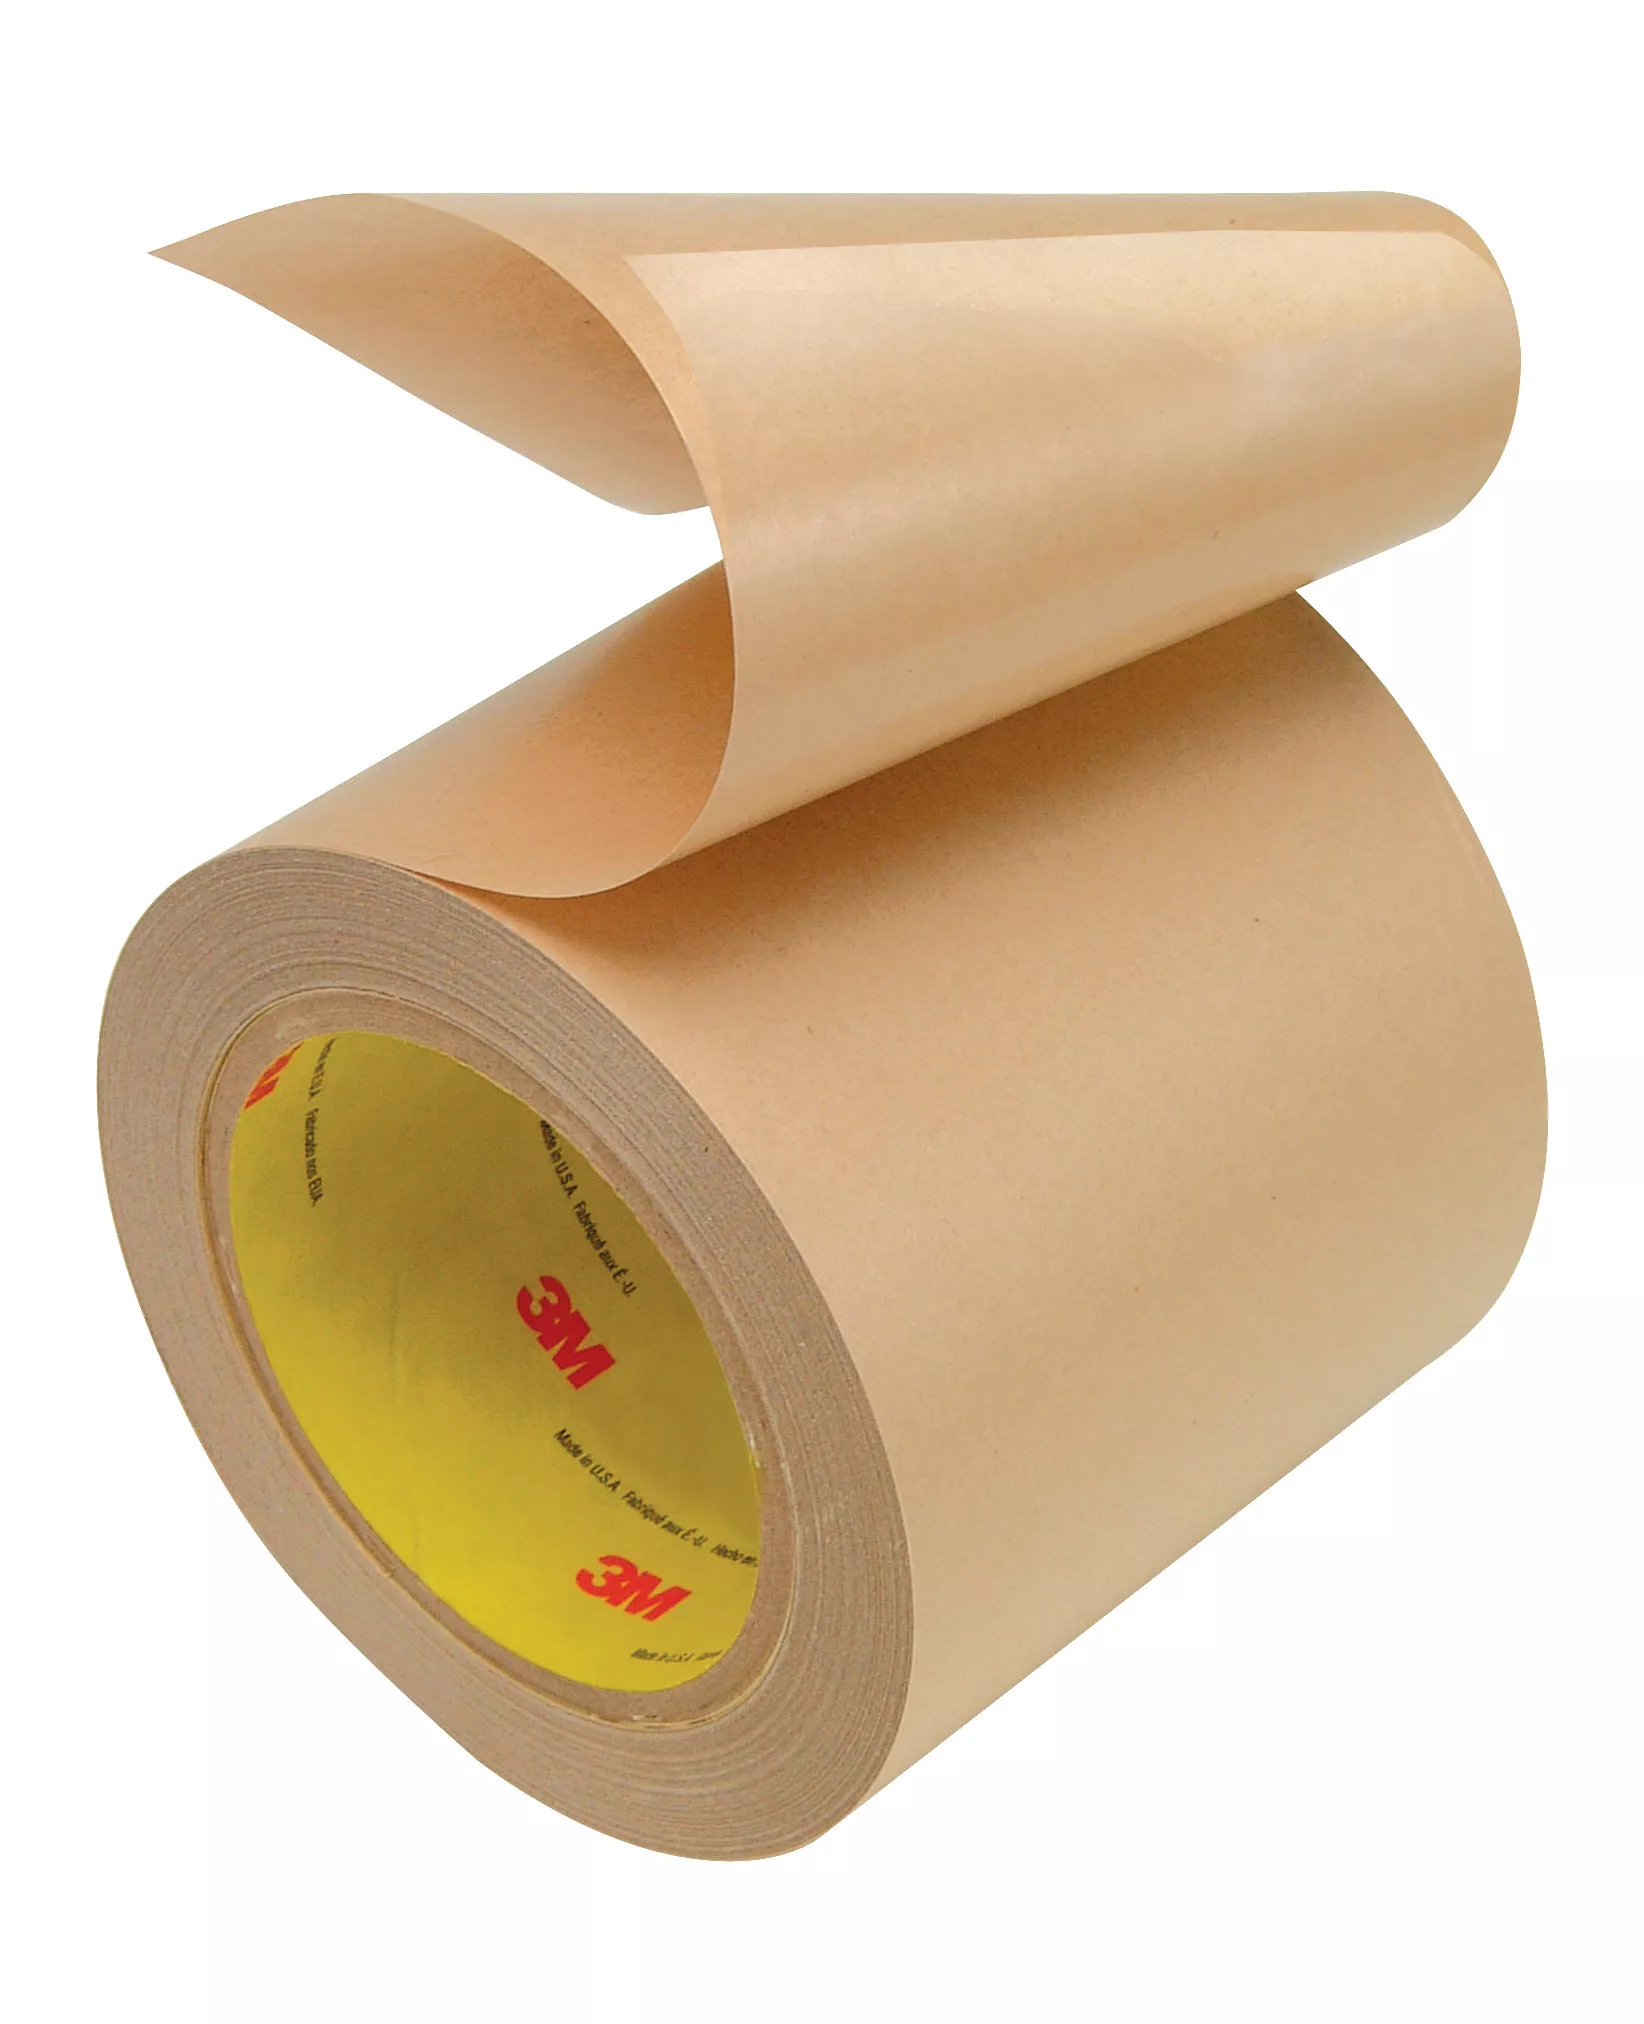 SKU 7010334603 | 3M™ Electrically Conductive Adhesive Transfer Tape 9703